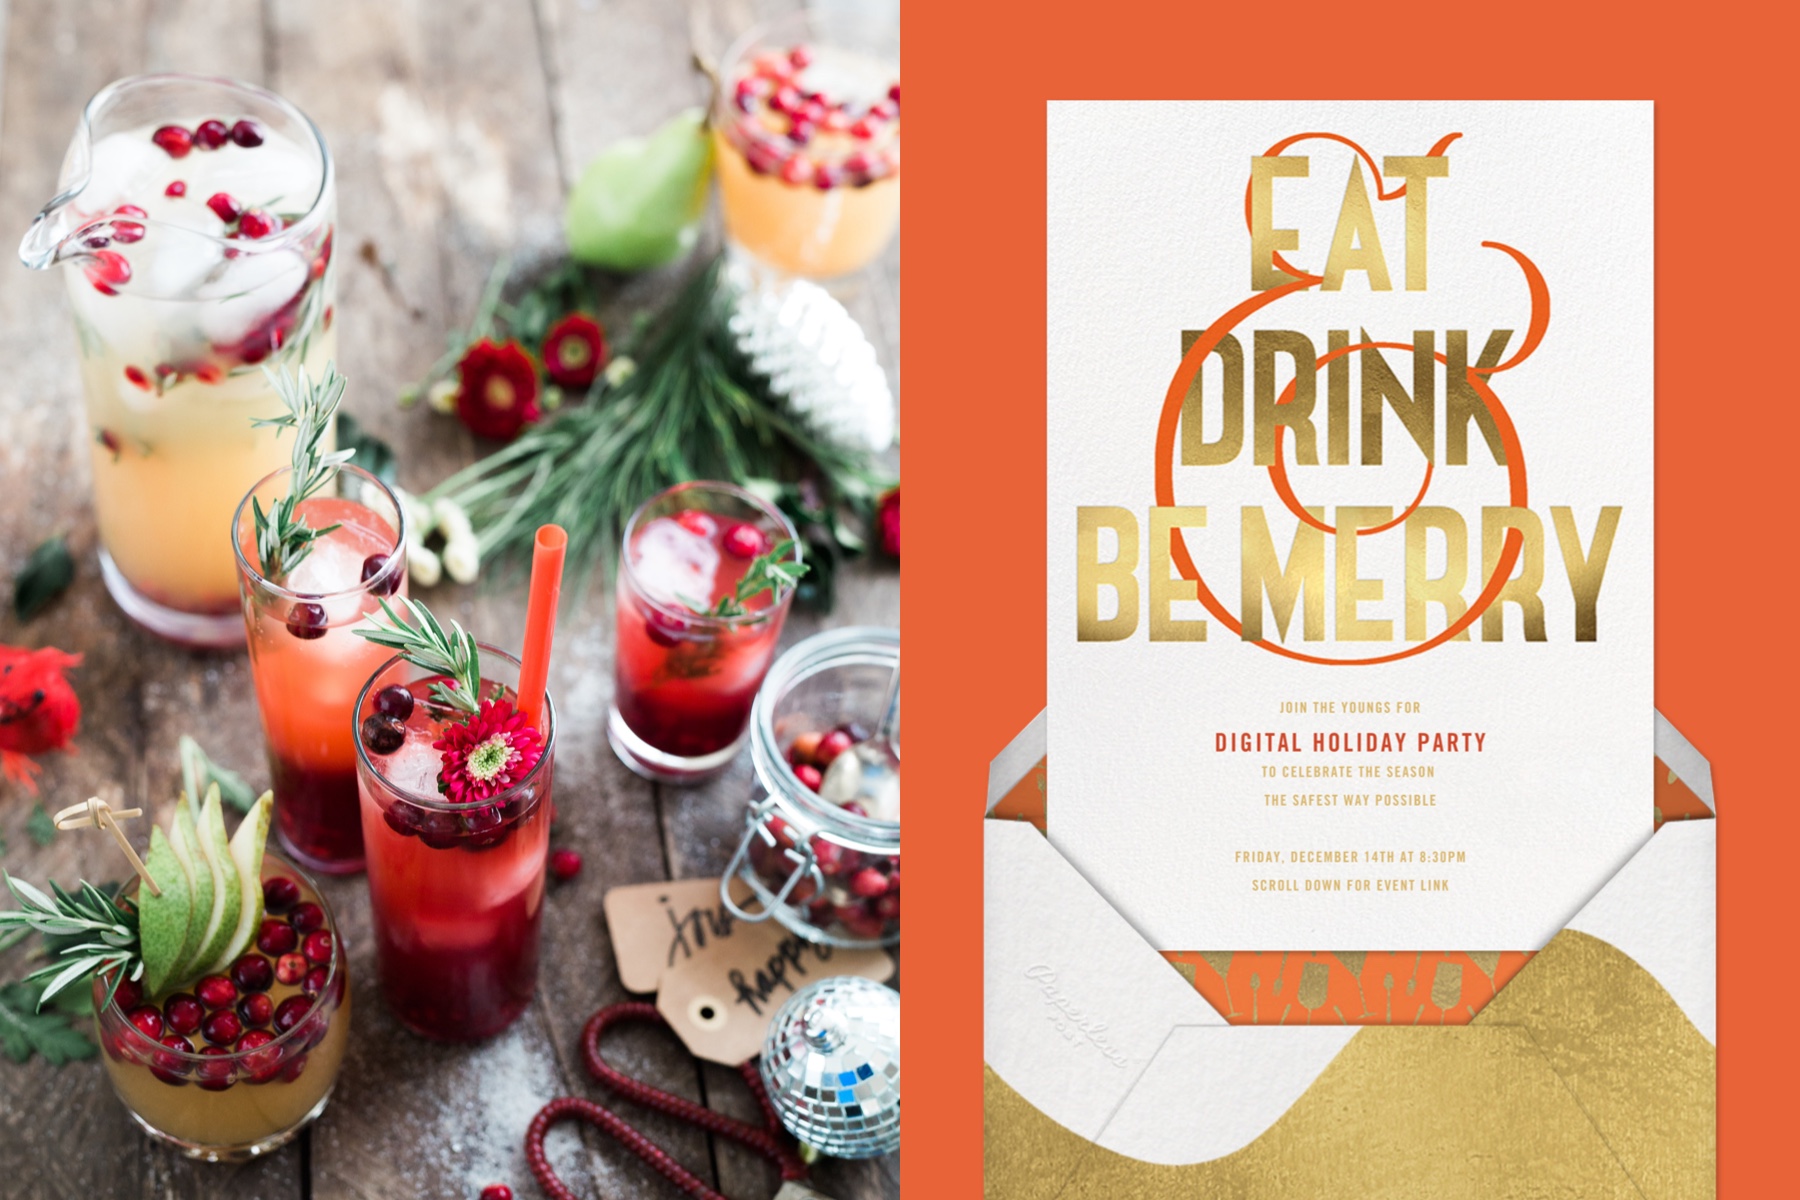 Left: Festive cocktails with leafy garnishes. Right: A Christmas party invitation reads “Eat, Drink, & Be Merry” in gold lettering. 